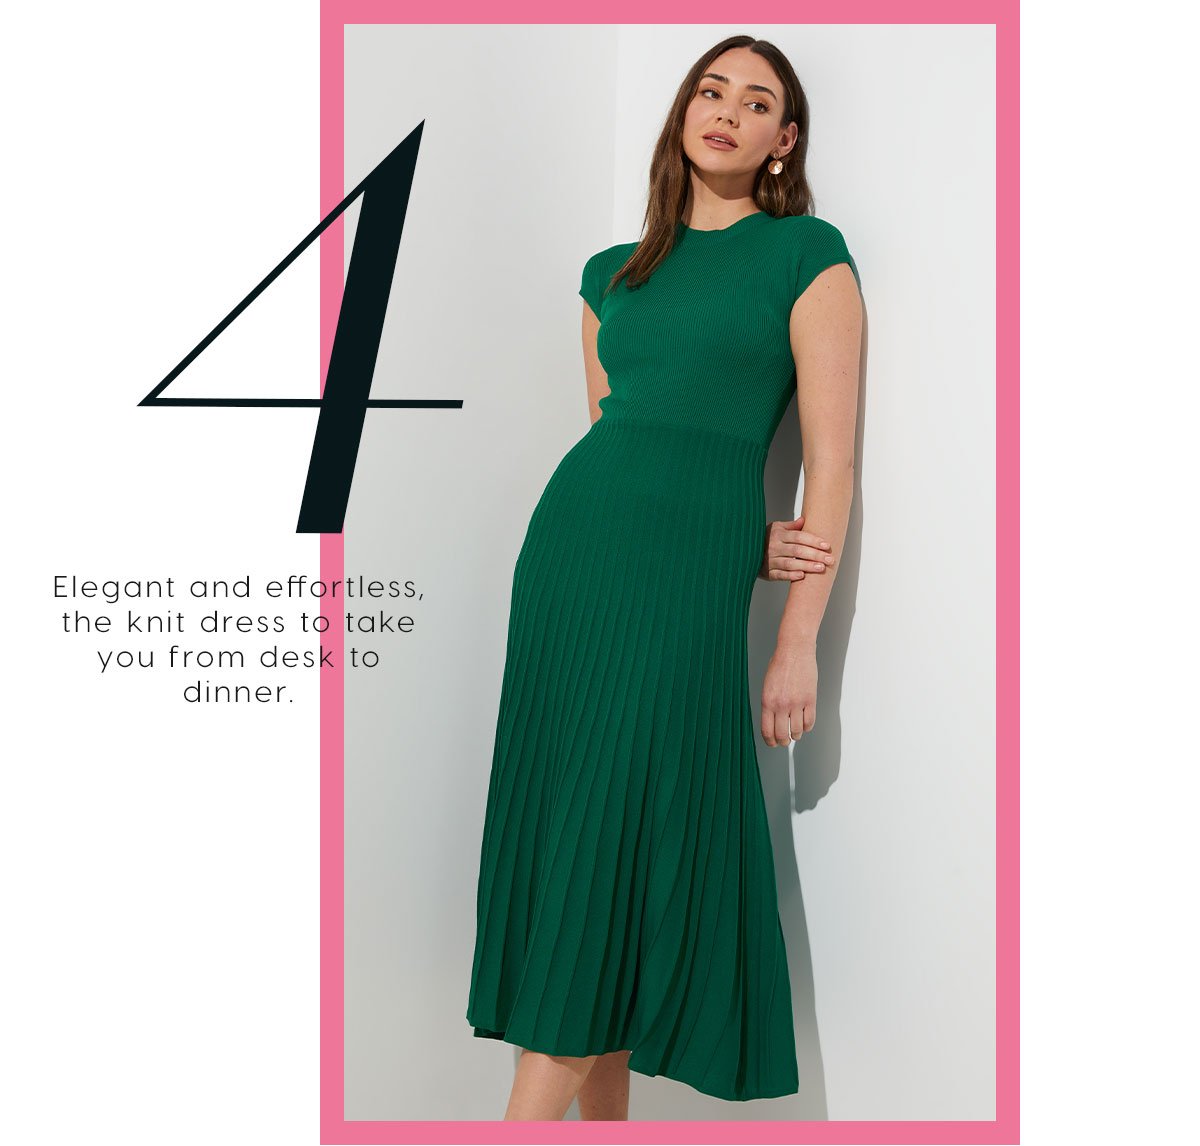 4. Elegant and effortless, the knit dress to take you from desk to dinner. 